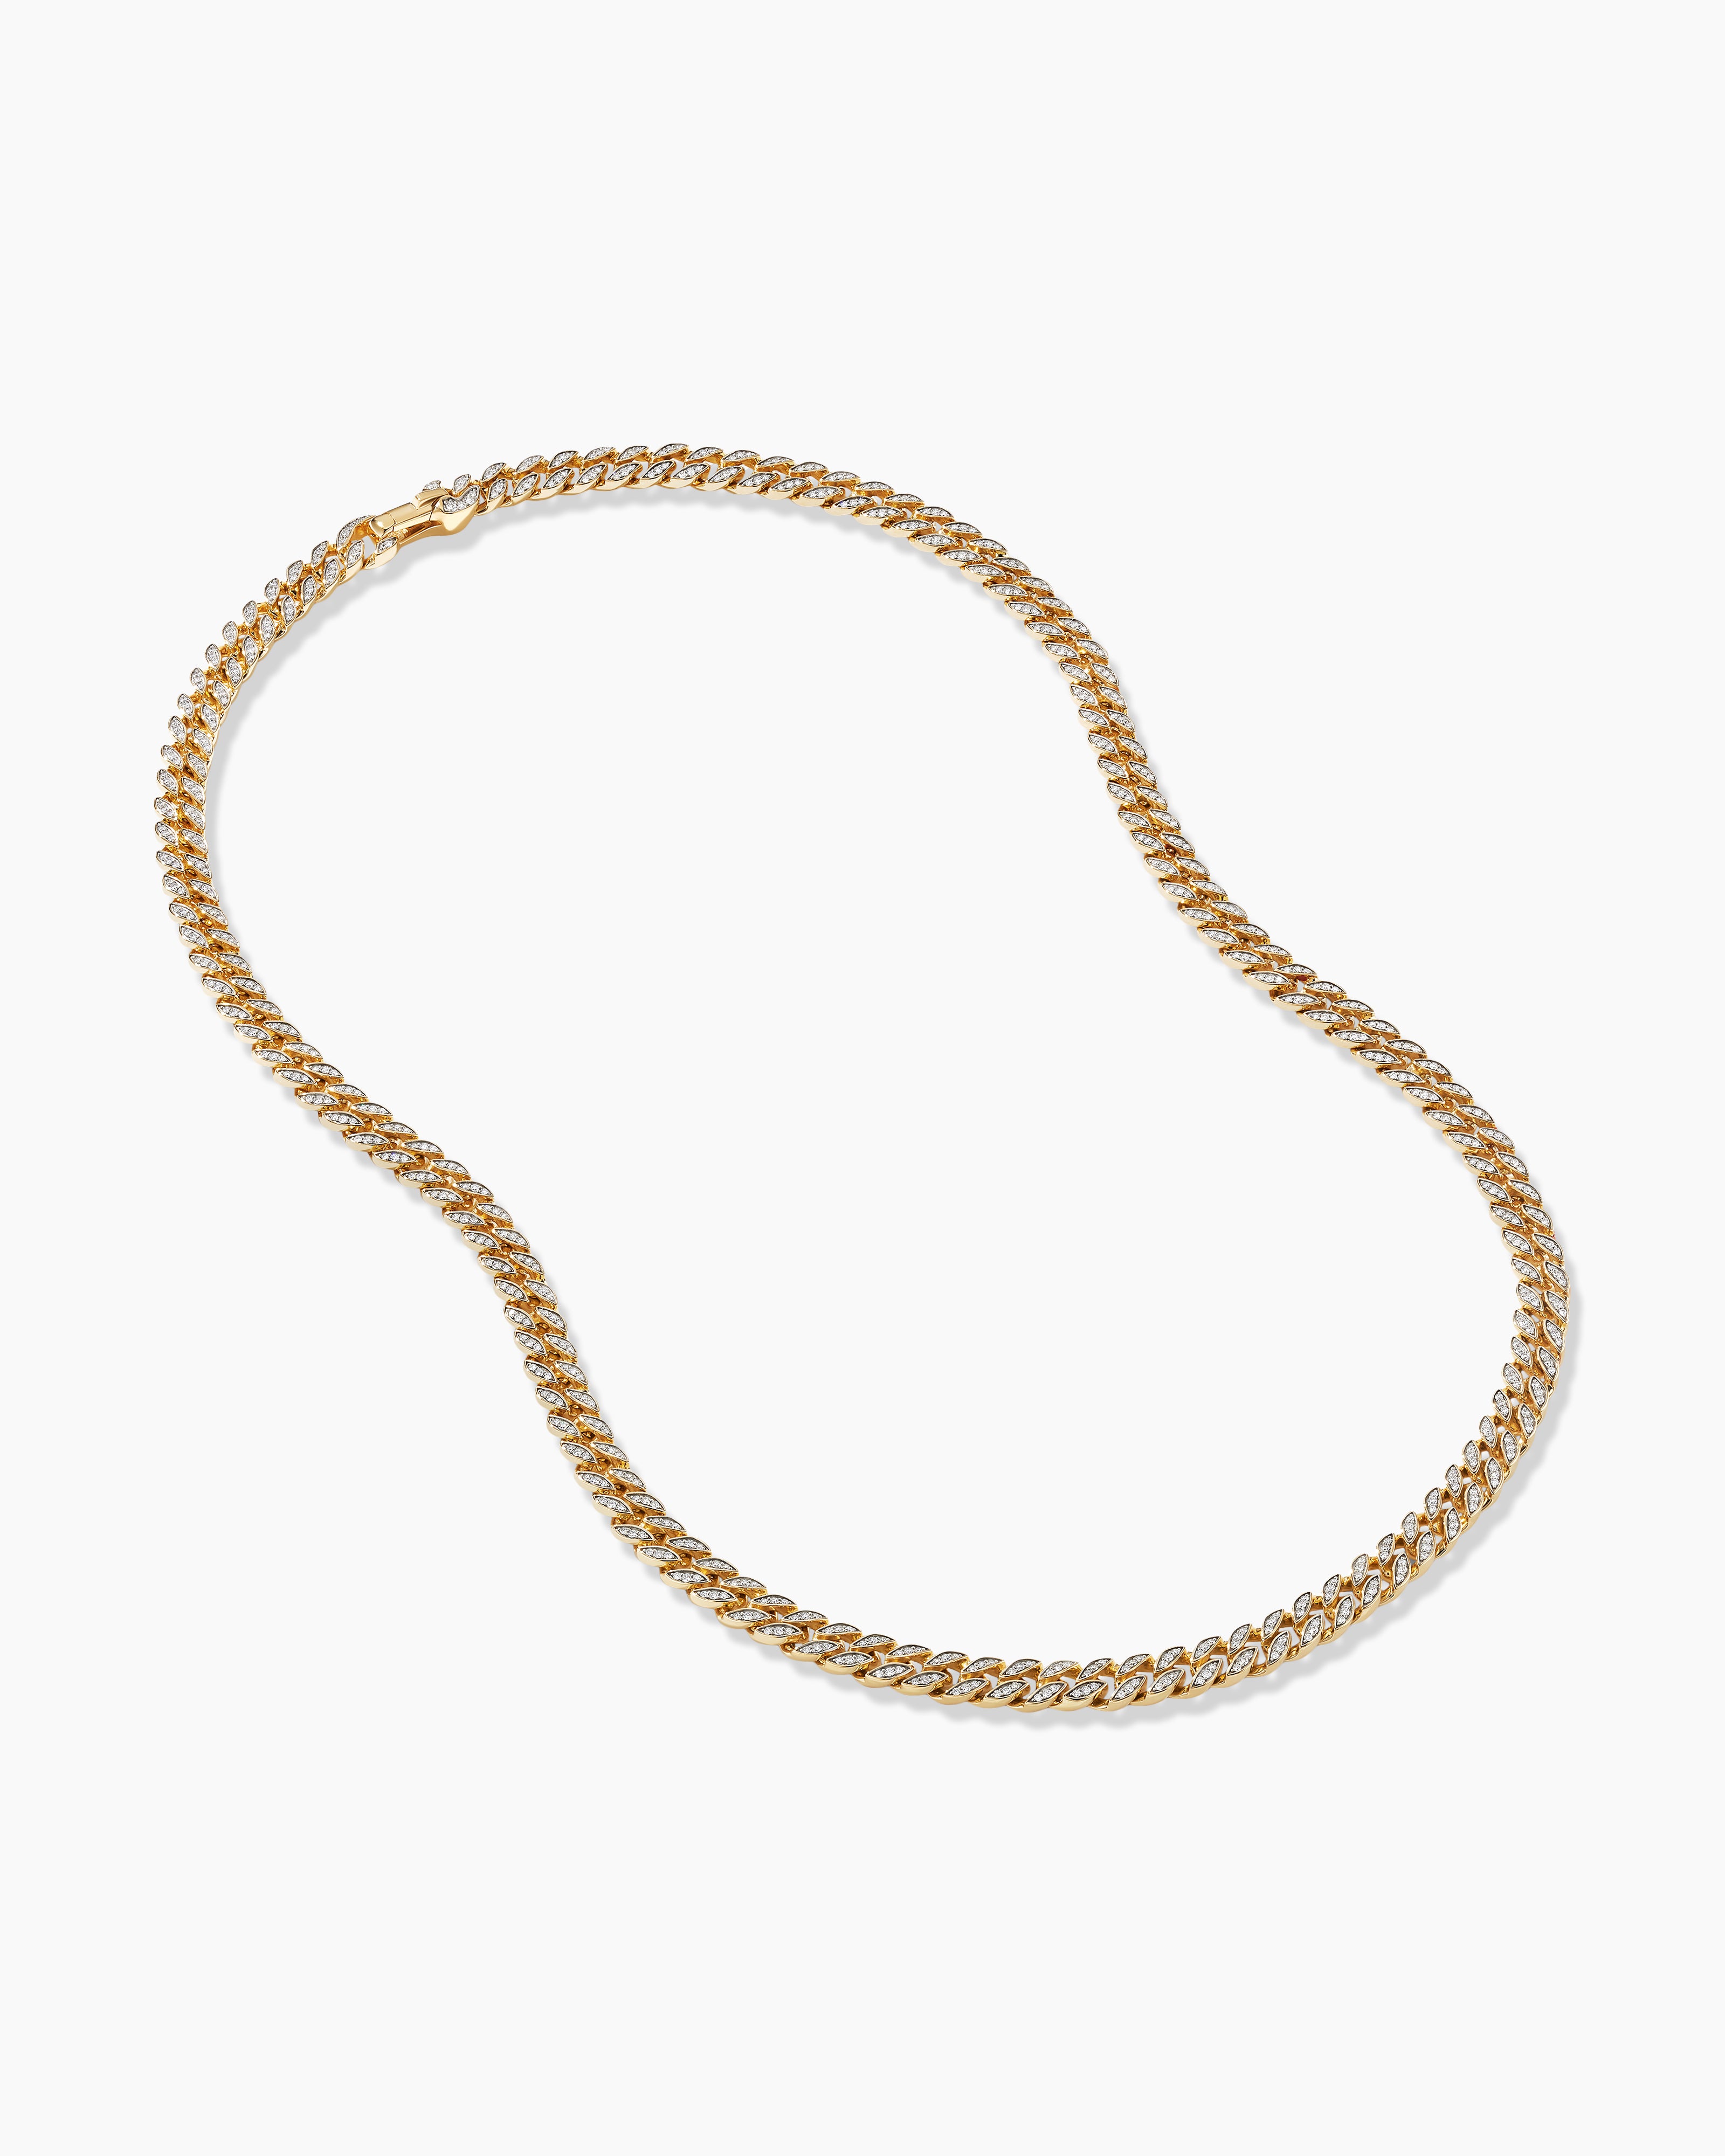 Mens Chain Gold 7mm Curb Chain Necklace Gold Chains for Men